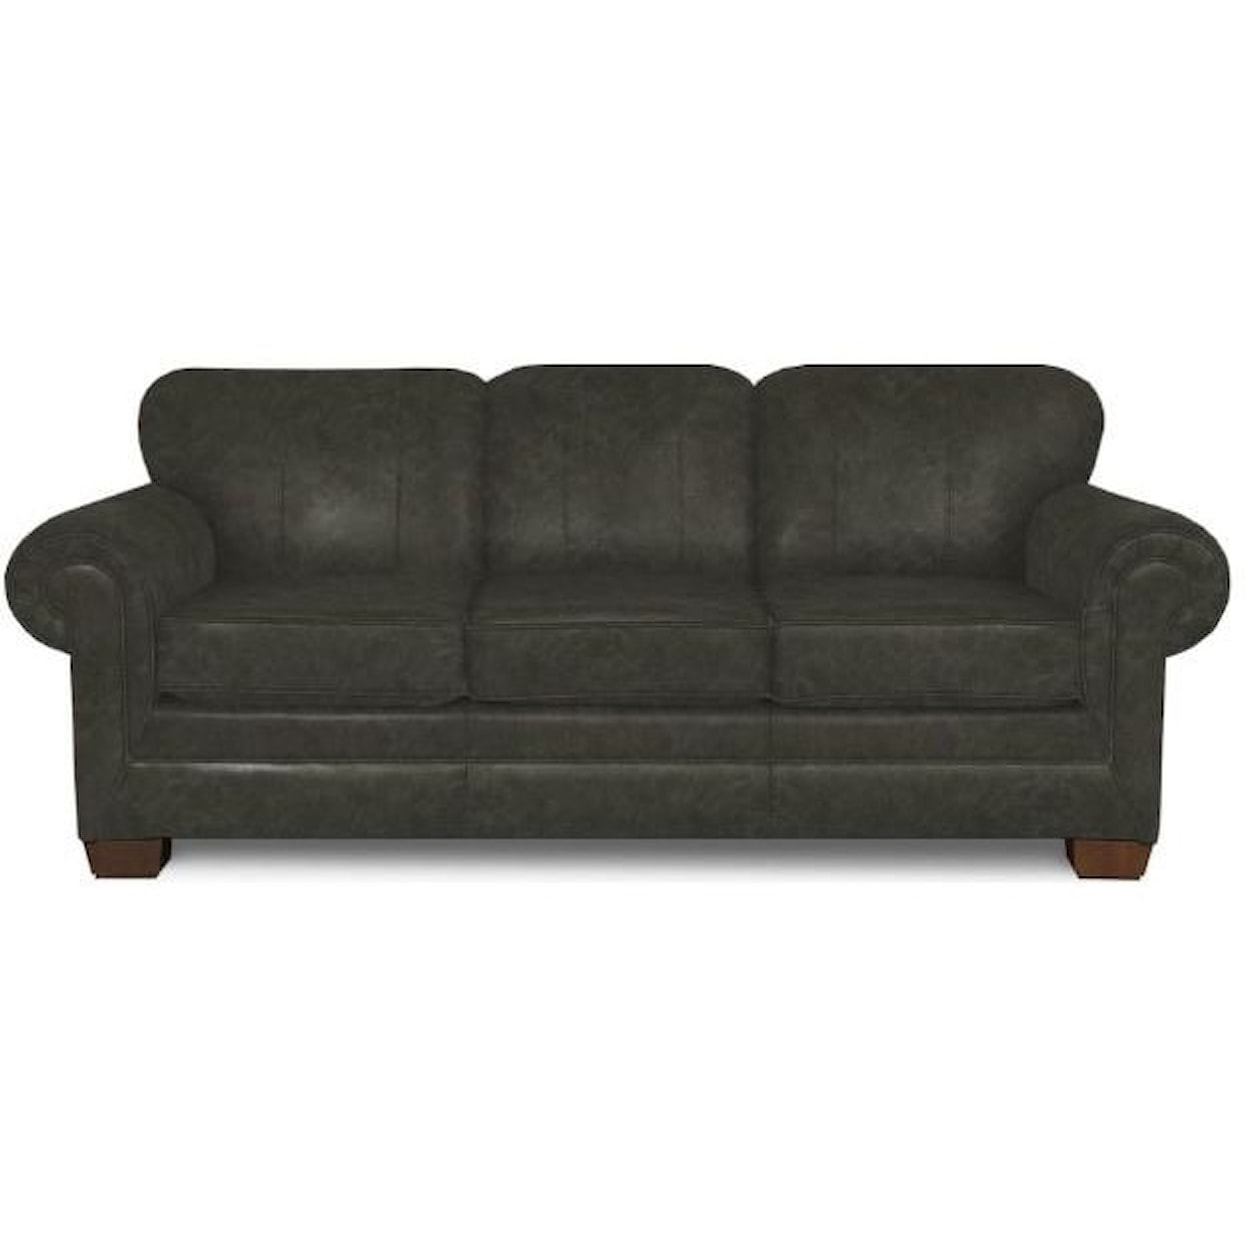 England 1430R/LSR Series Leather Sofa with Upgraded Frame Kit